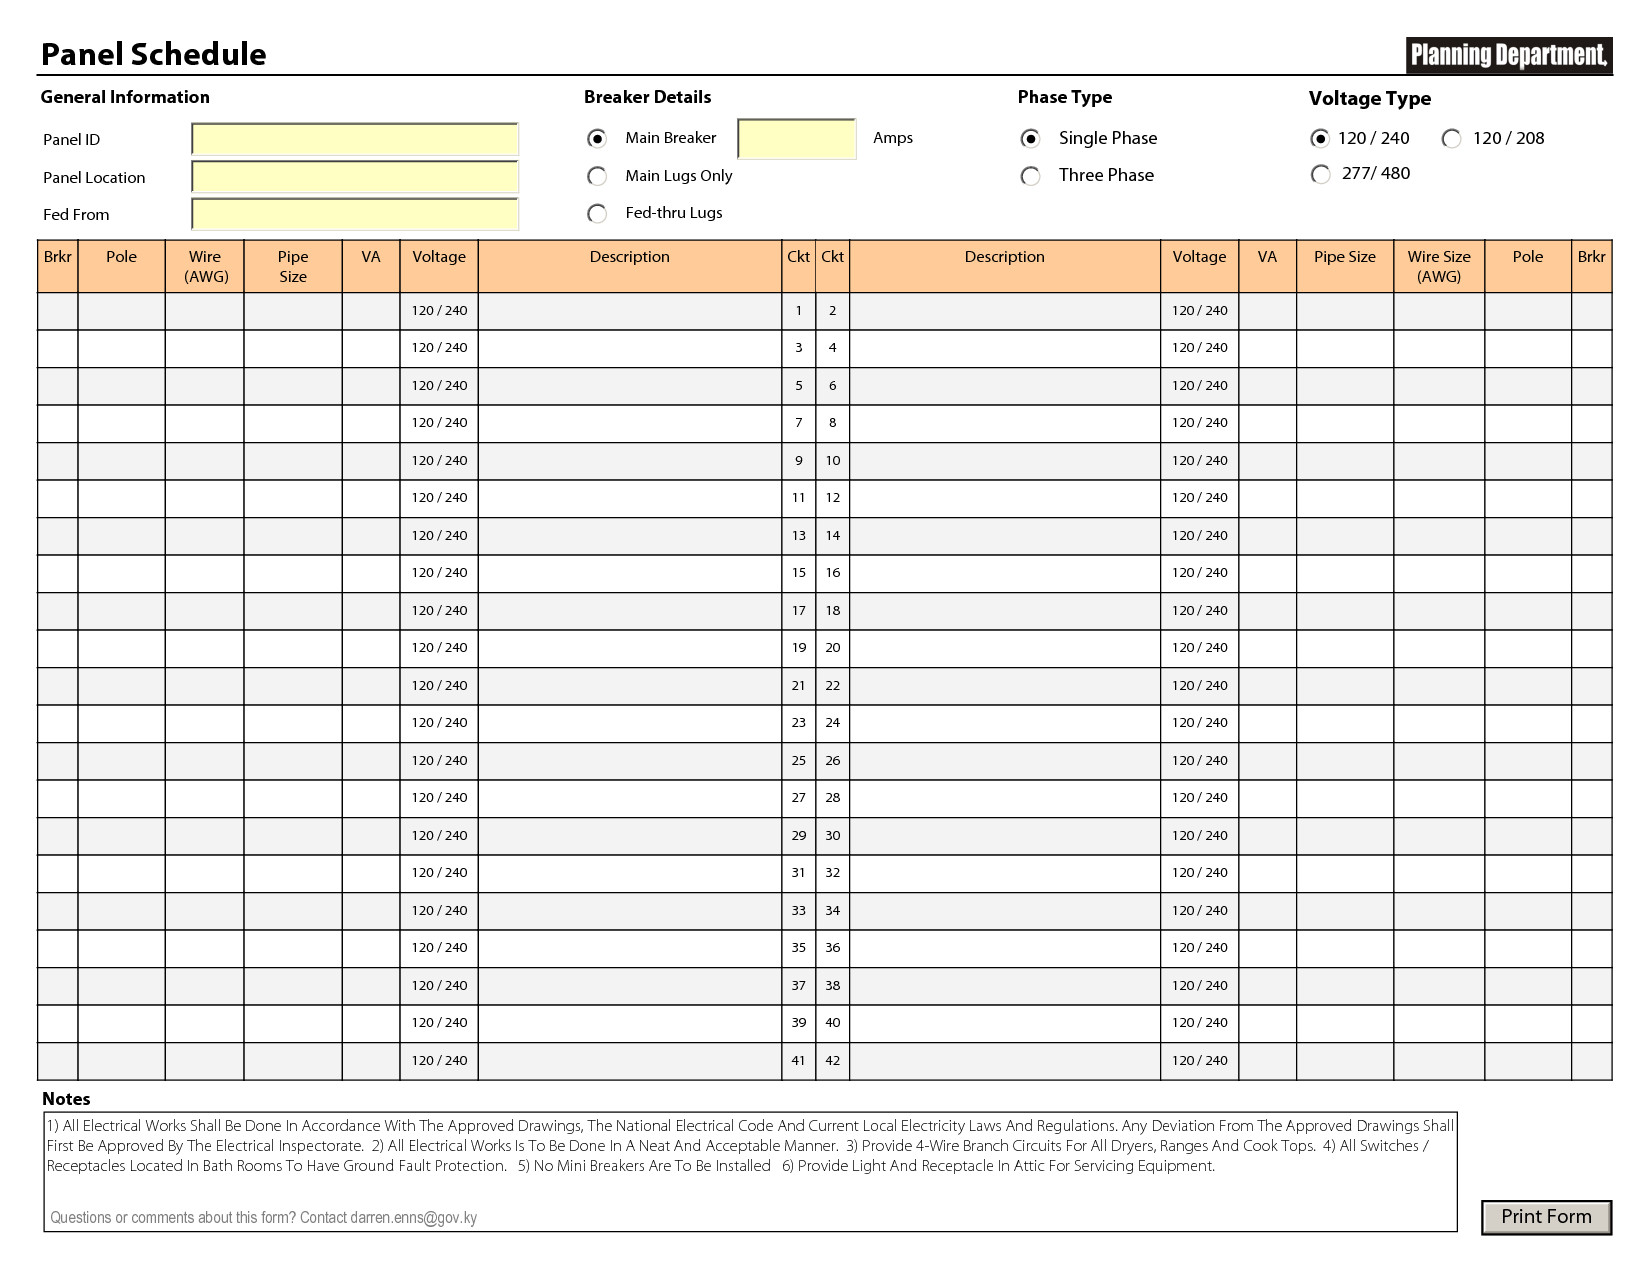 Electric Panel Schedule Template Electrical Panel Schedule Templates Tespin